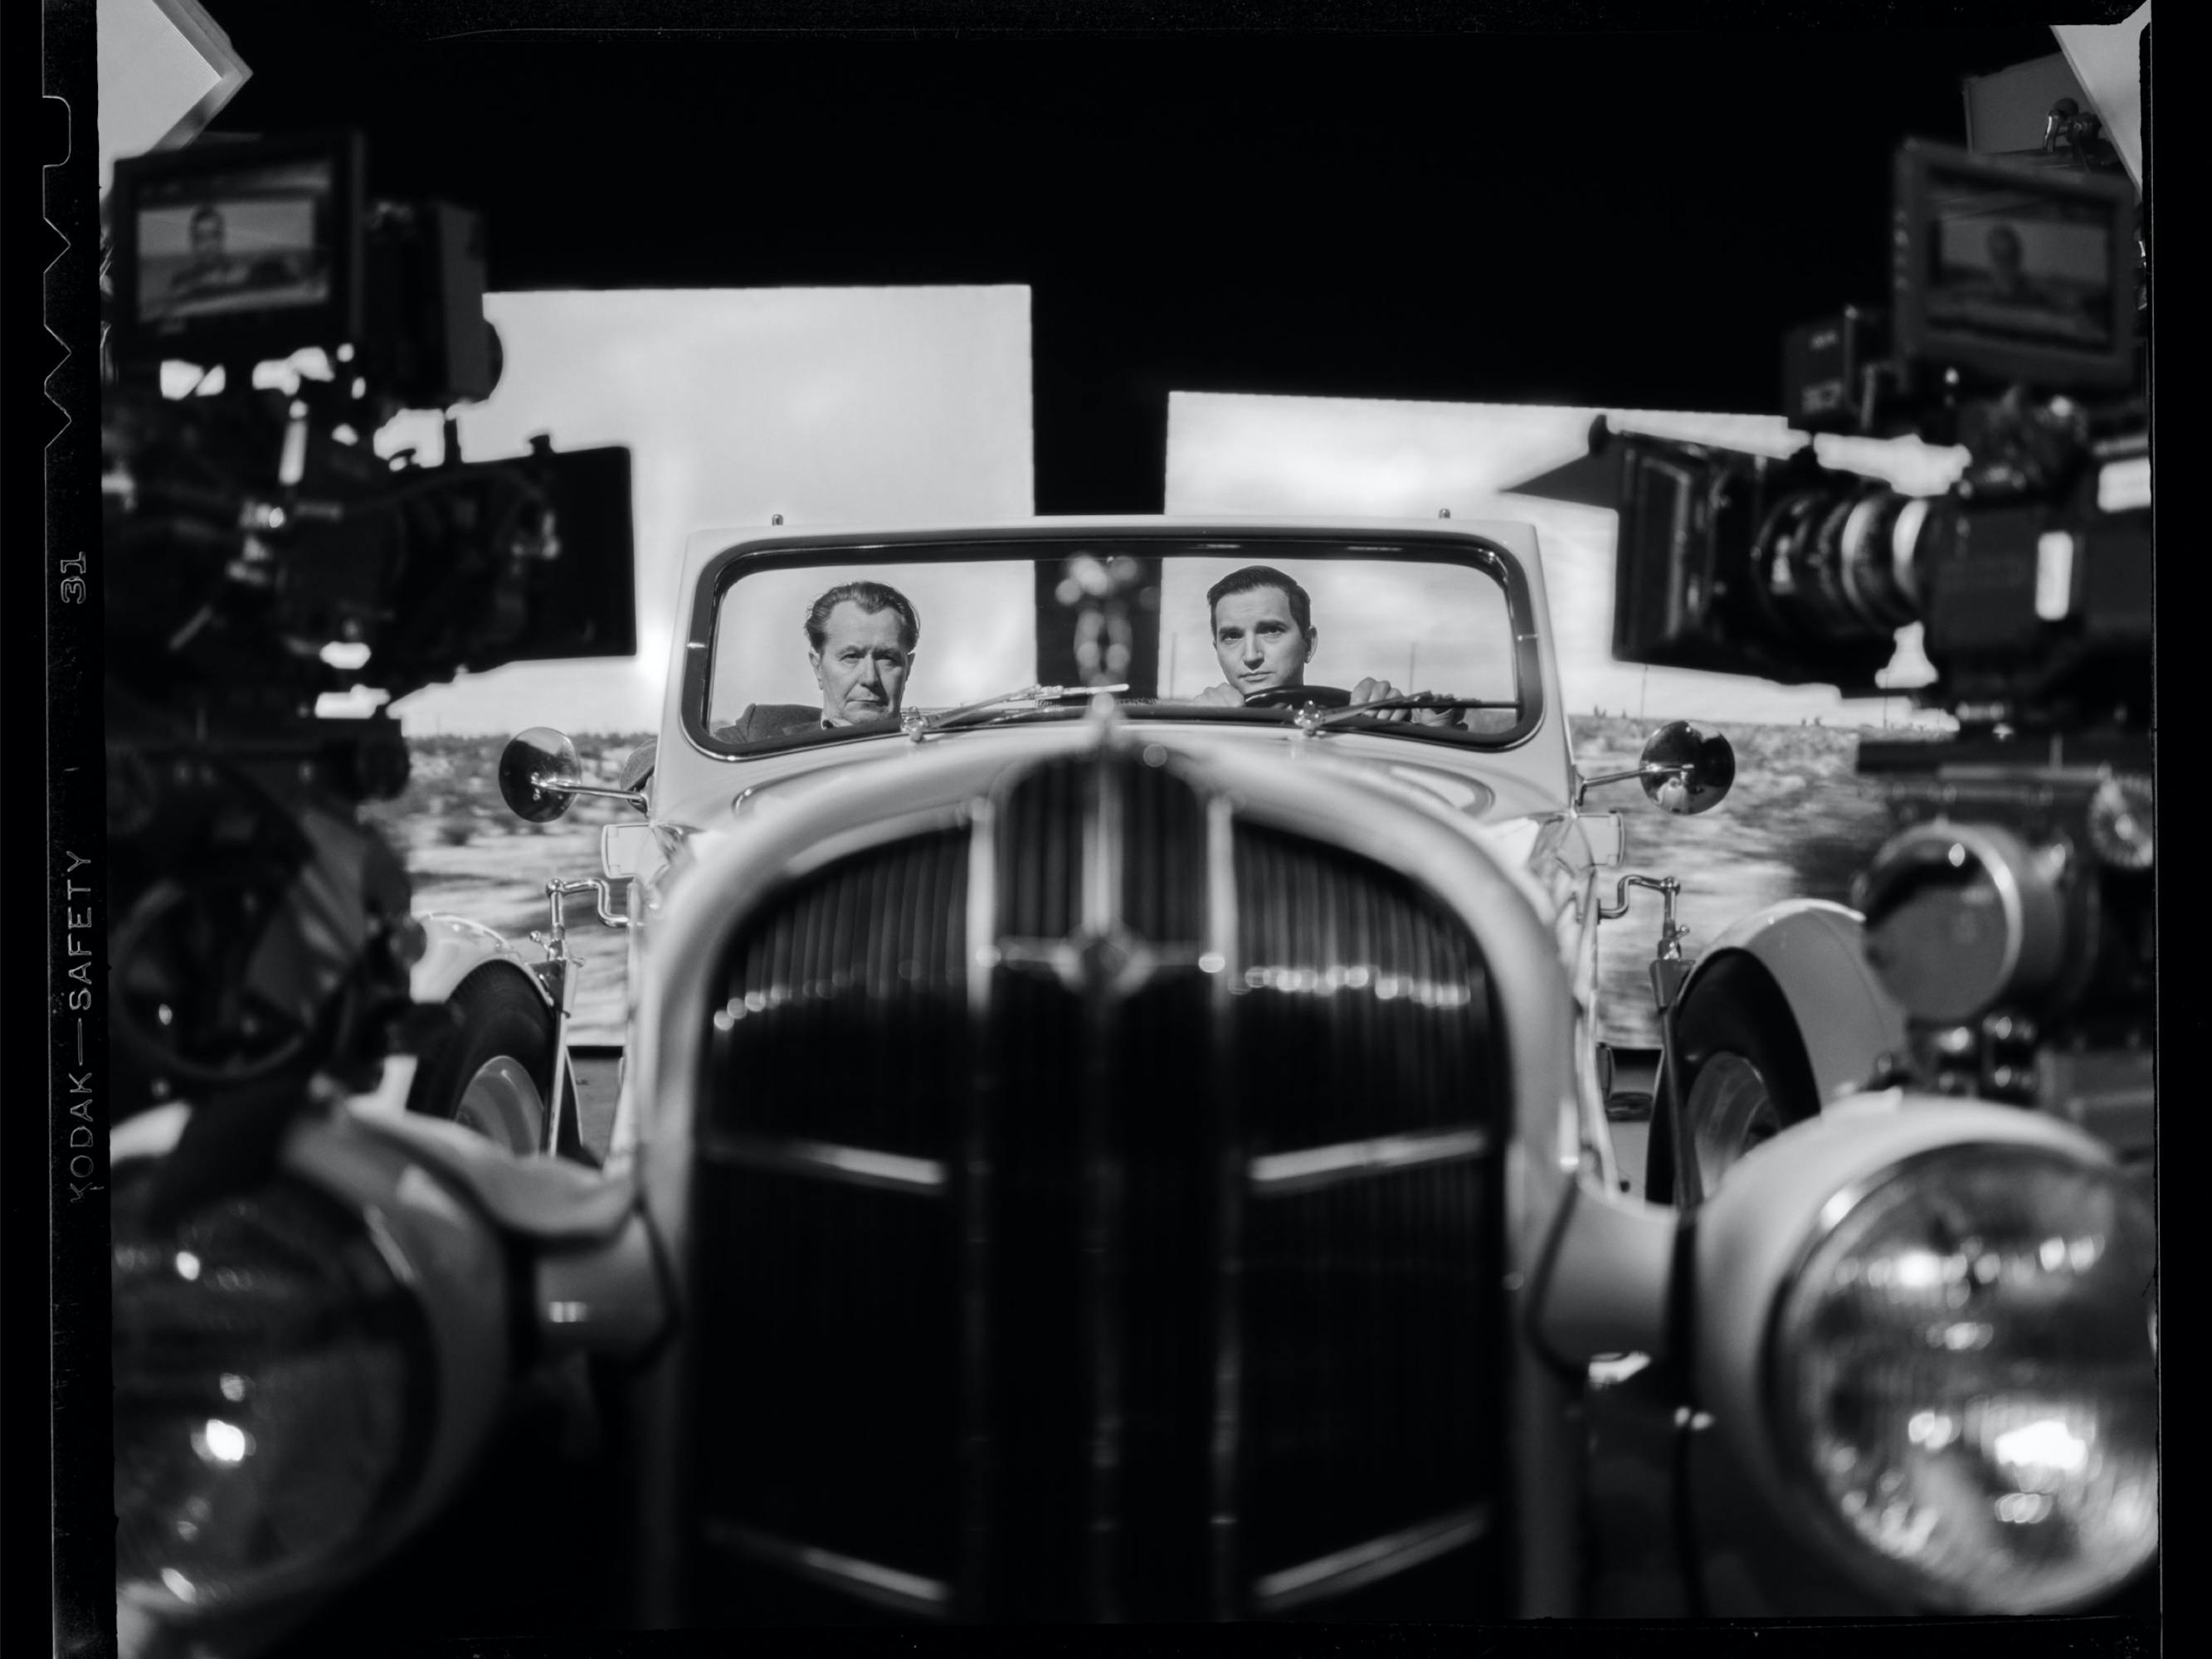 In this satisfyingly symmetrical black-and-white photo, Oldman and Persaud are visible from the head up behind the windshield of a sizable classic car. Behind them images of California scenery are projected on two screens. In front of them, we can see two cameras, each projecting out over one of the cars headlights